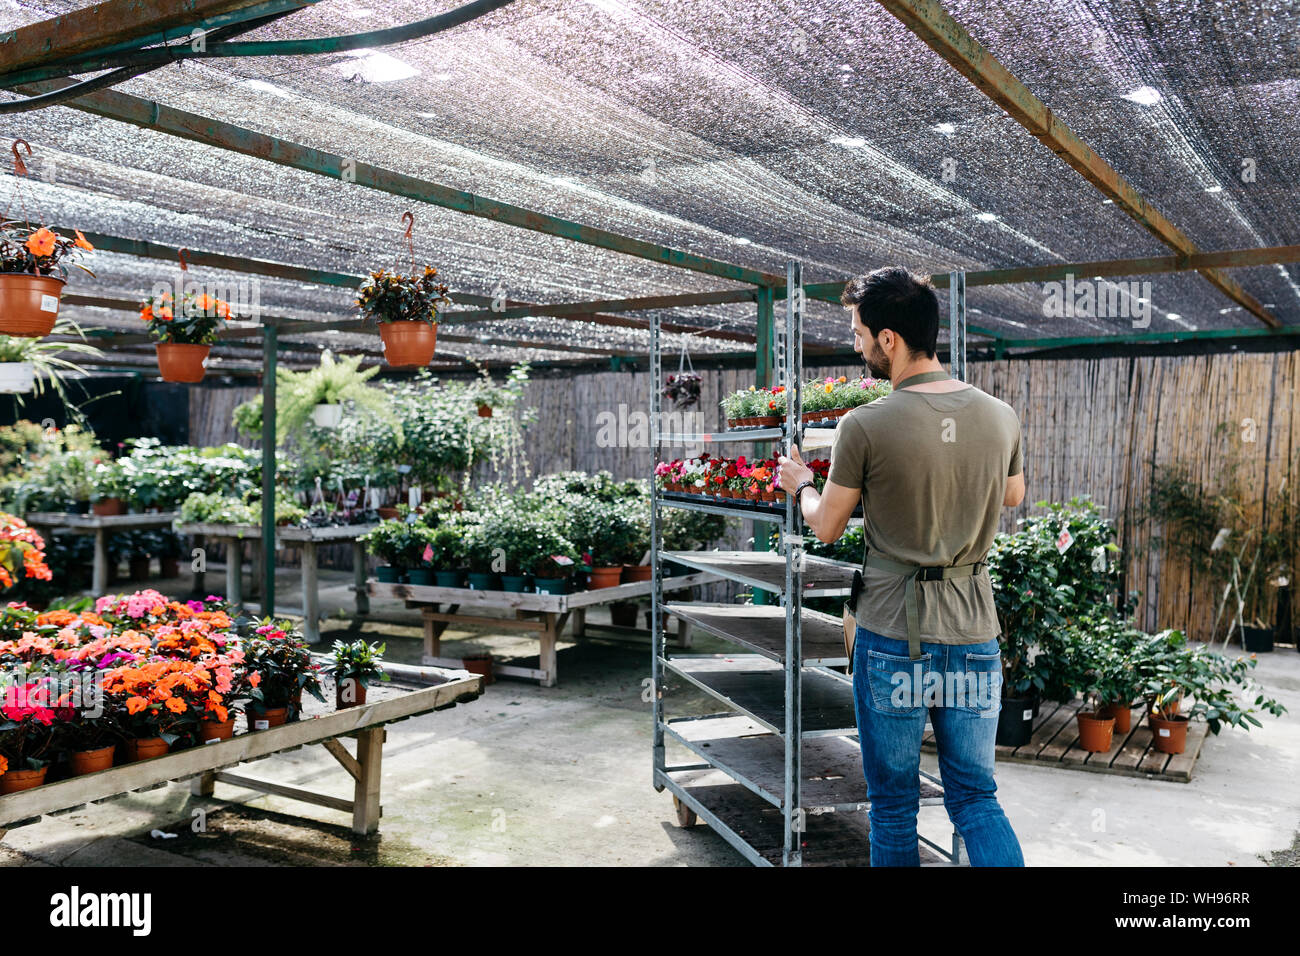 Worker in a garden center pushing a cart with plants Stock Photo